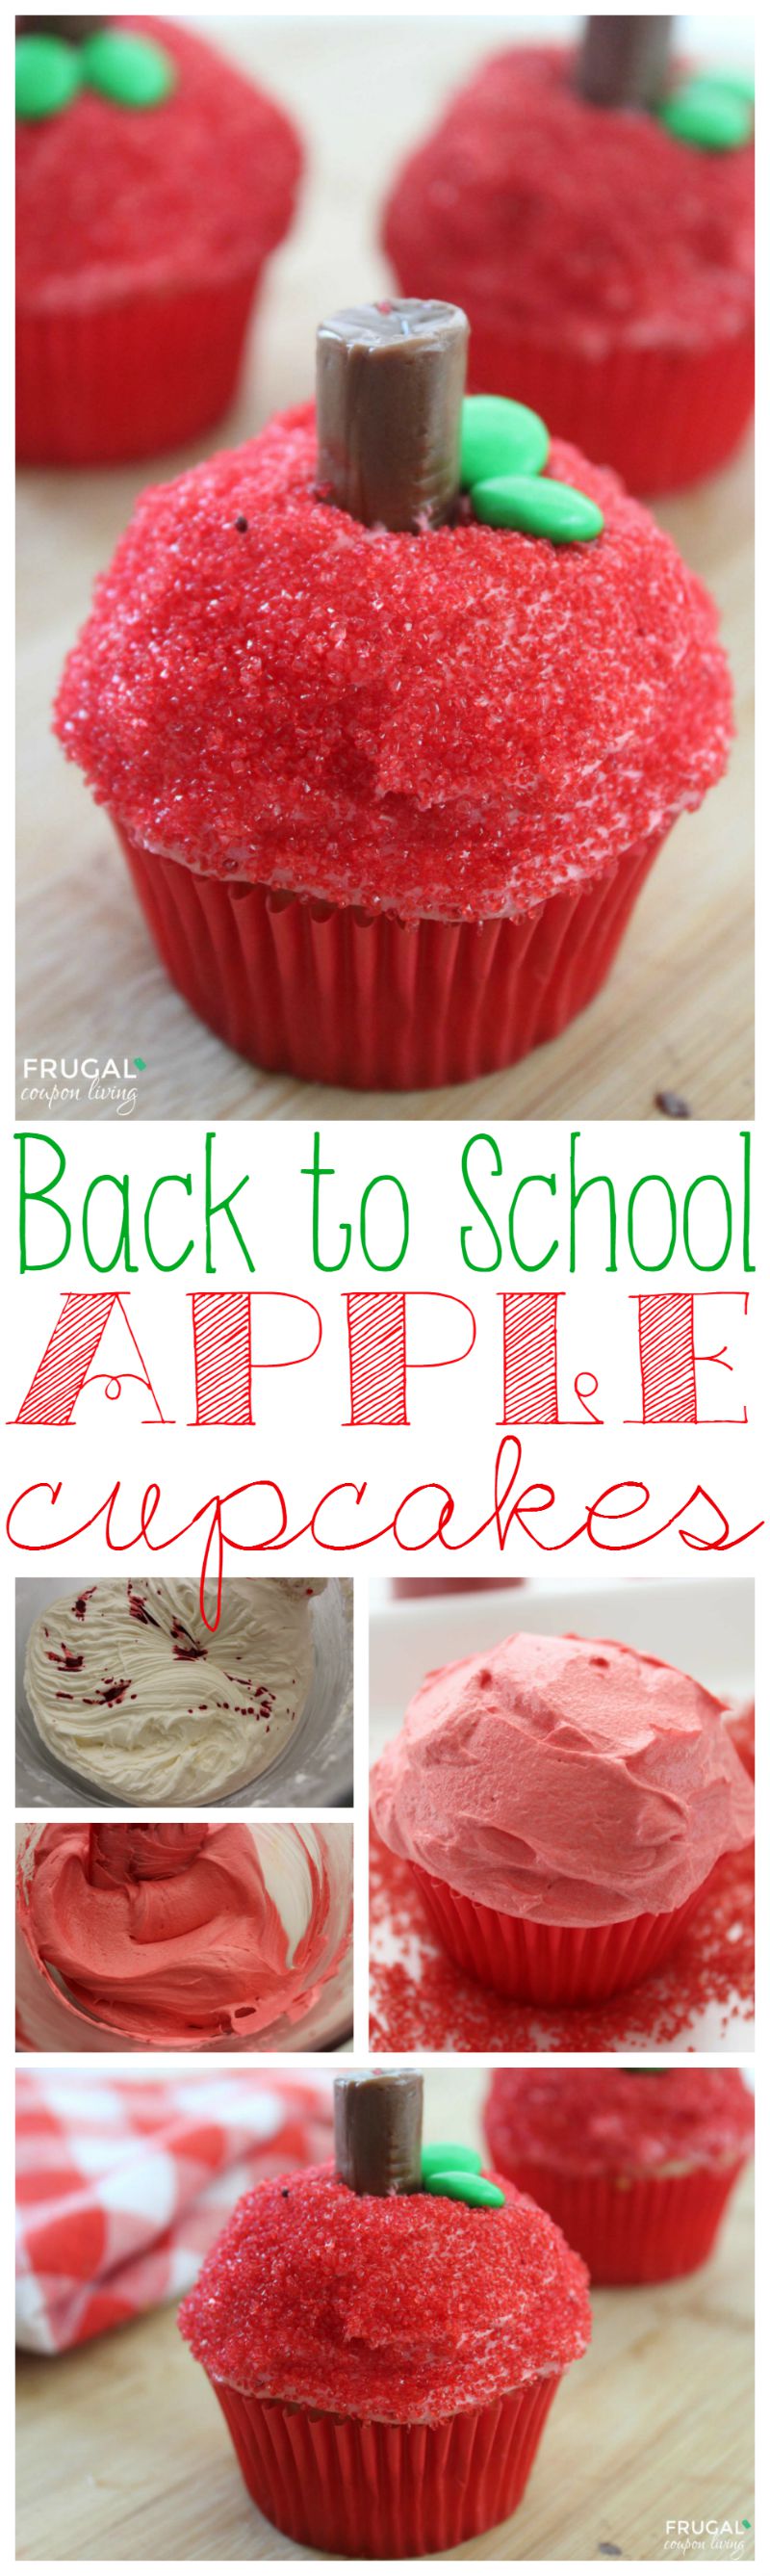 back-to-school-apple-cupcakes-Collage-frugal-coupon-living